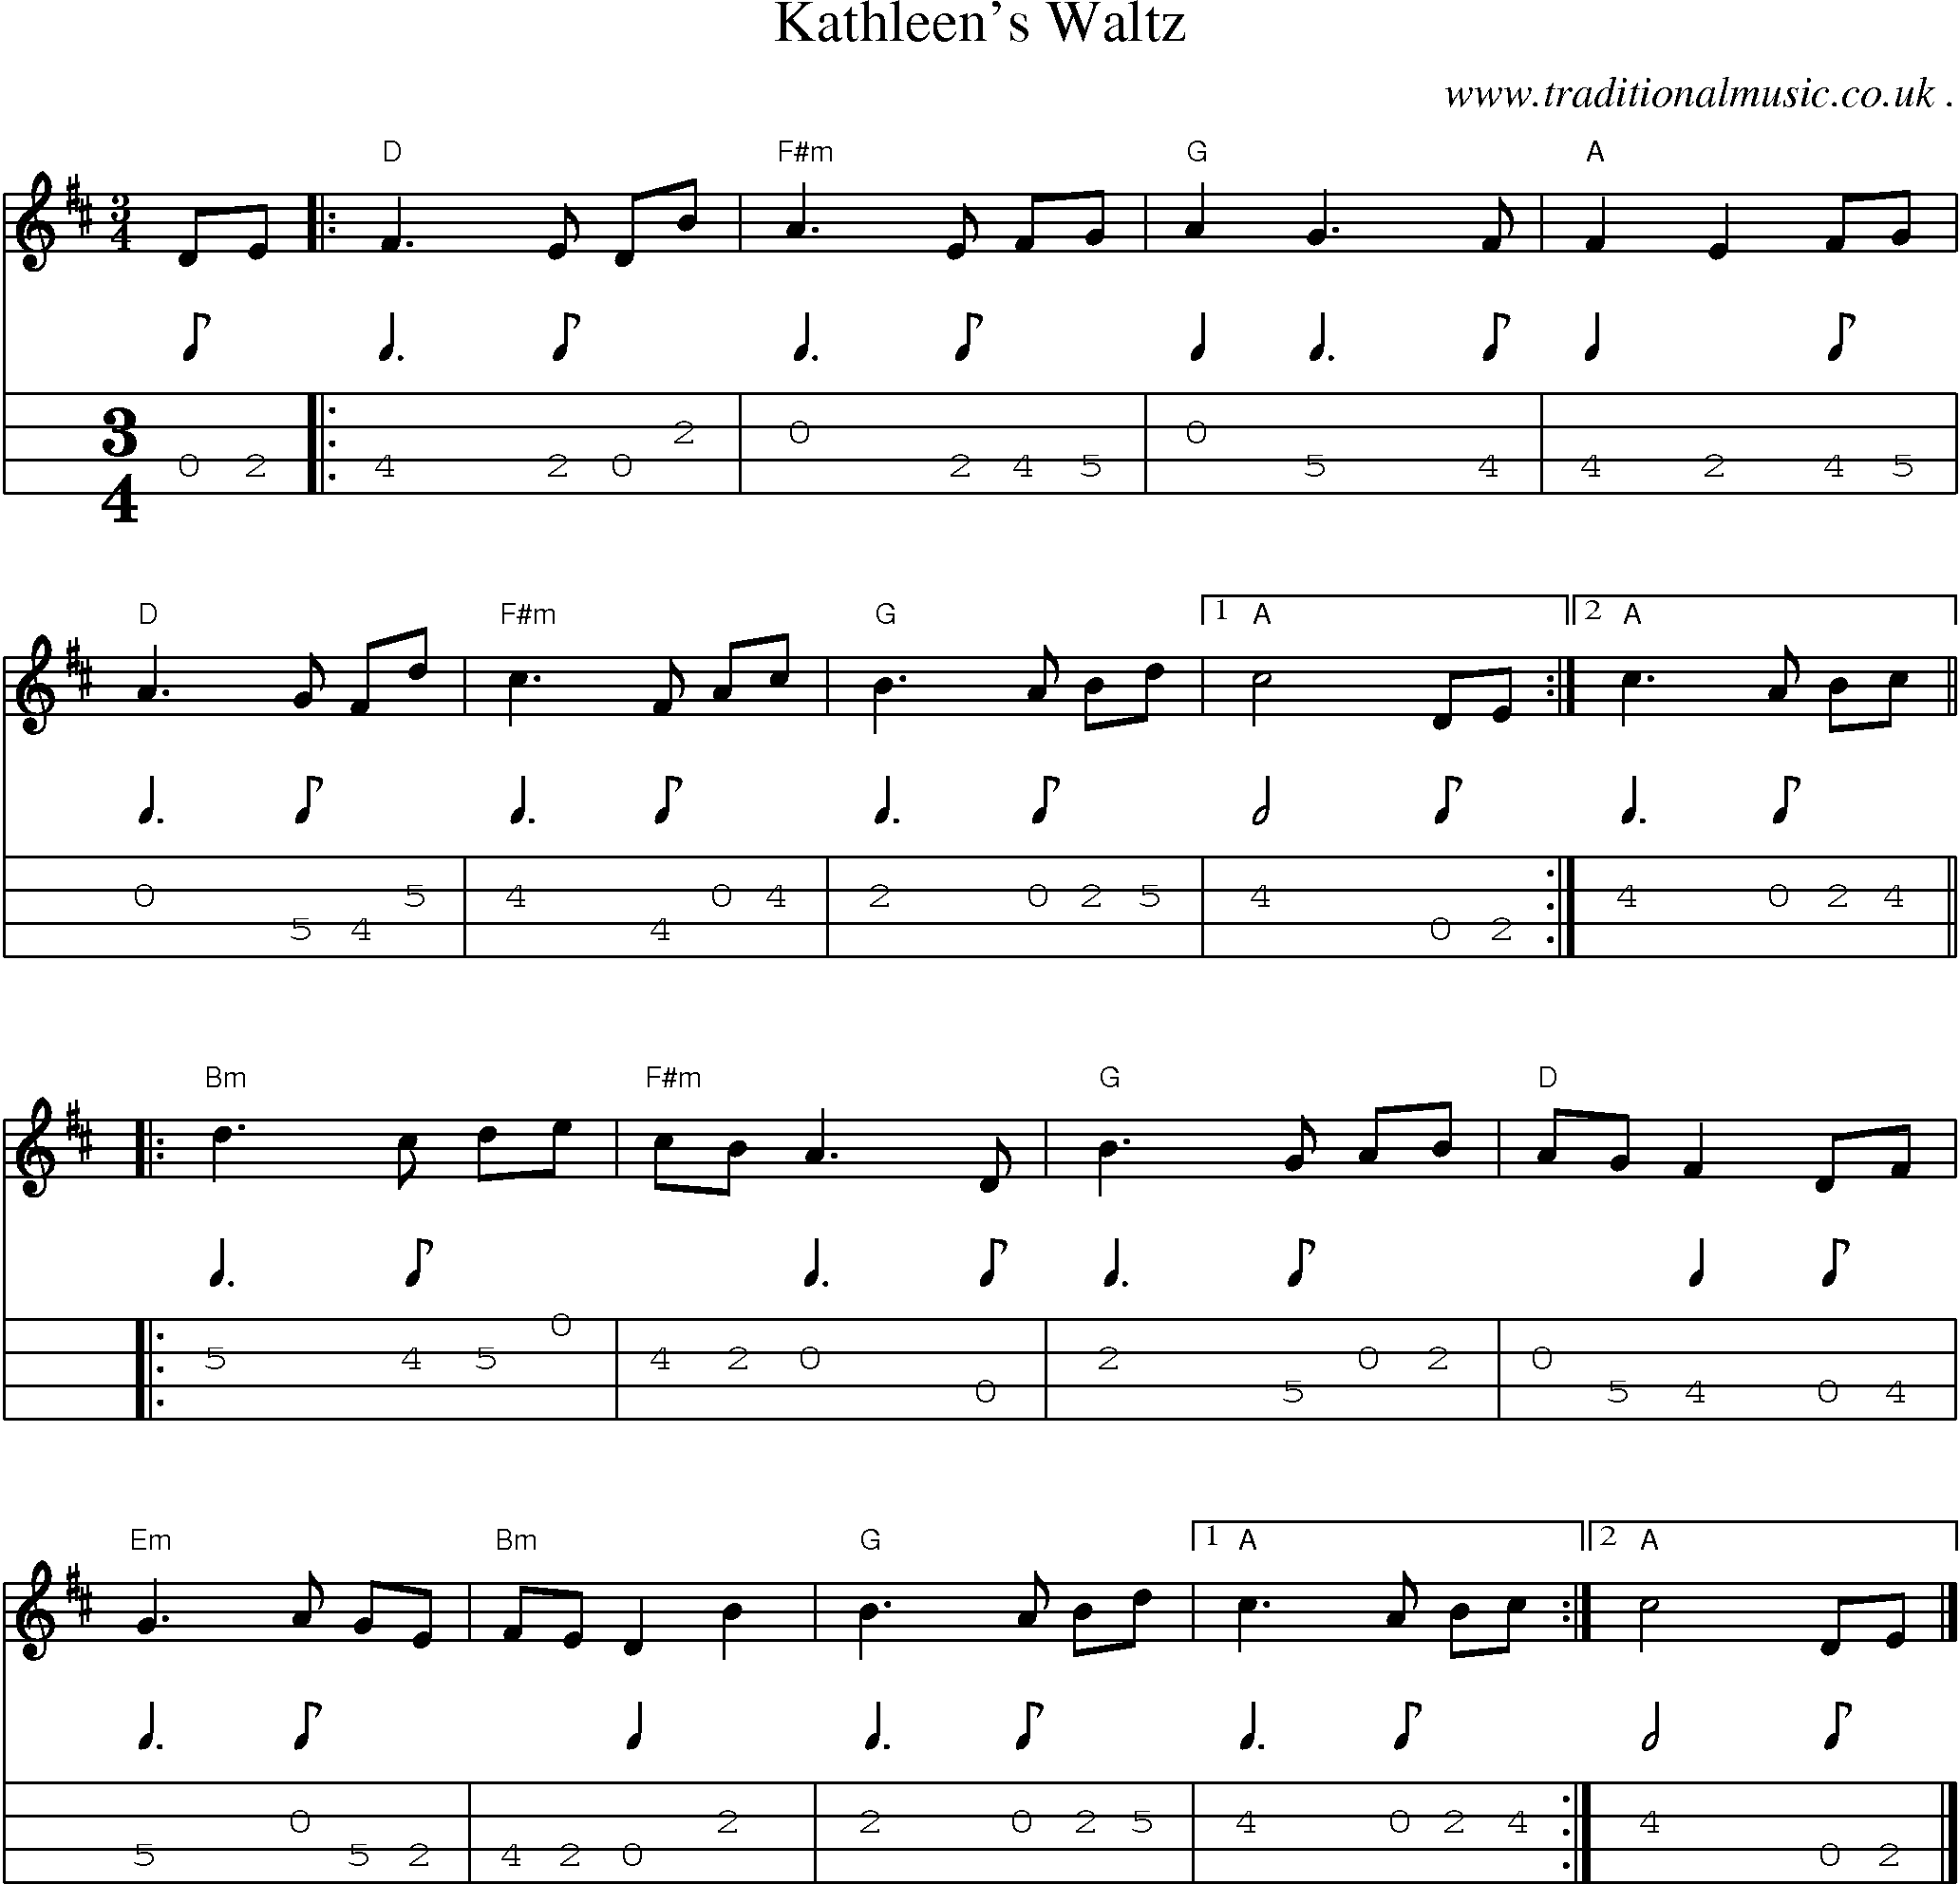 Music Score and Guitar Tabs for Kathleens Waltz